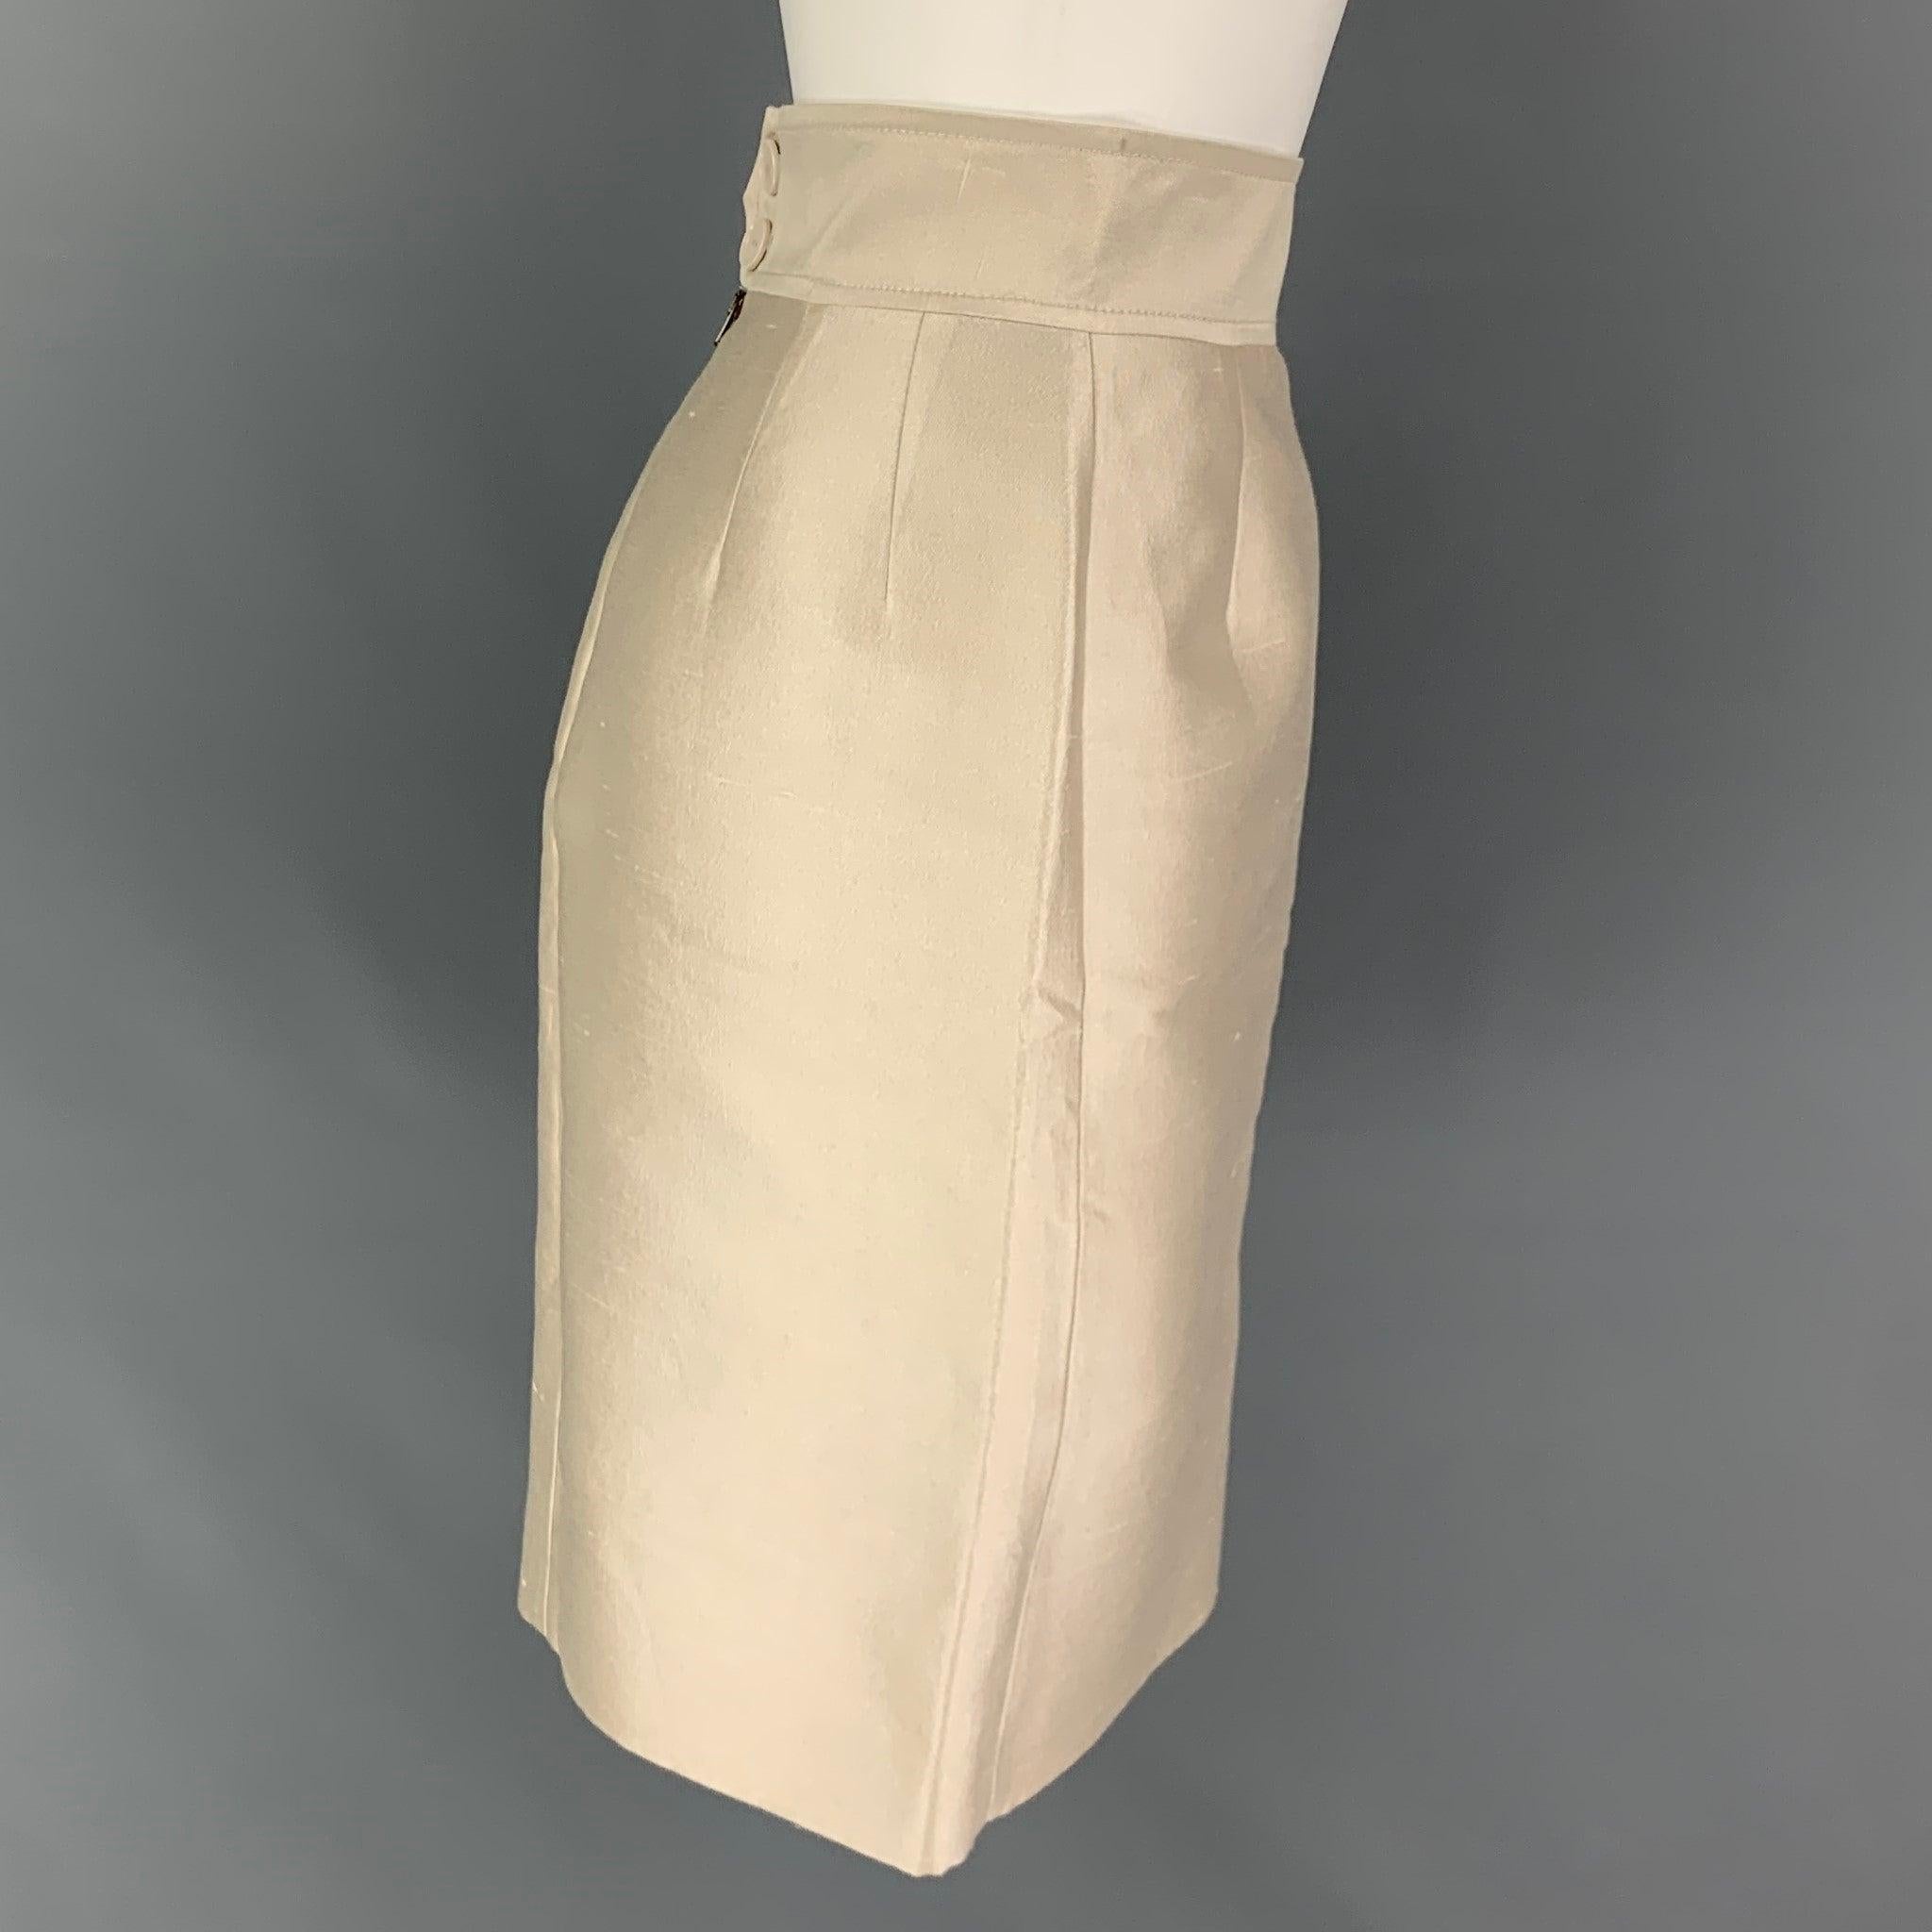 STELLA McCARTNEY skirt comes in a champagne silk / cotton featuring a pencil style, wide waistband, and a back buttoned & zipper closure.
Very Good
Pre-Owned Condition. 

Marked:   Size tag removed 

Measurements: 
  Waist: 28 inches  Hip: 36 inches